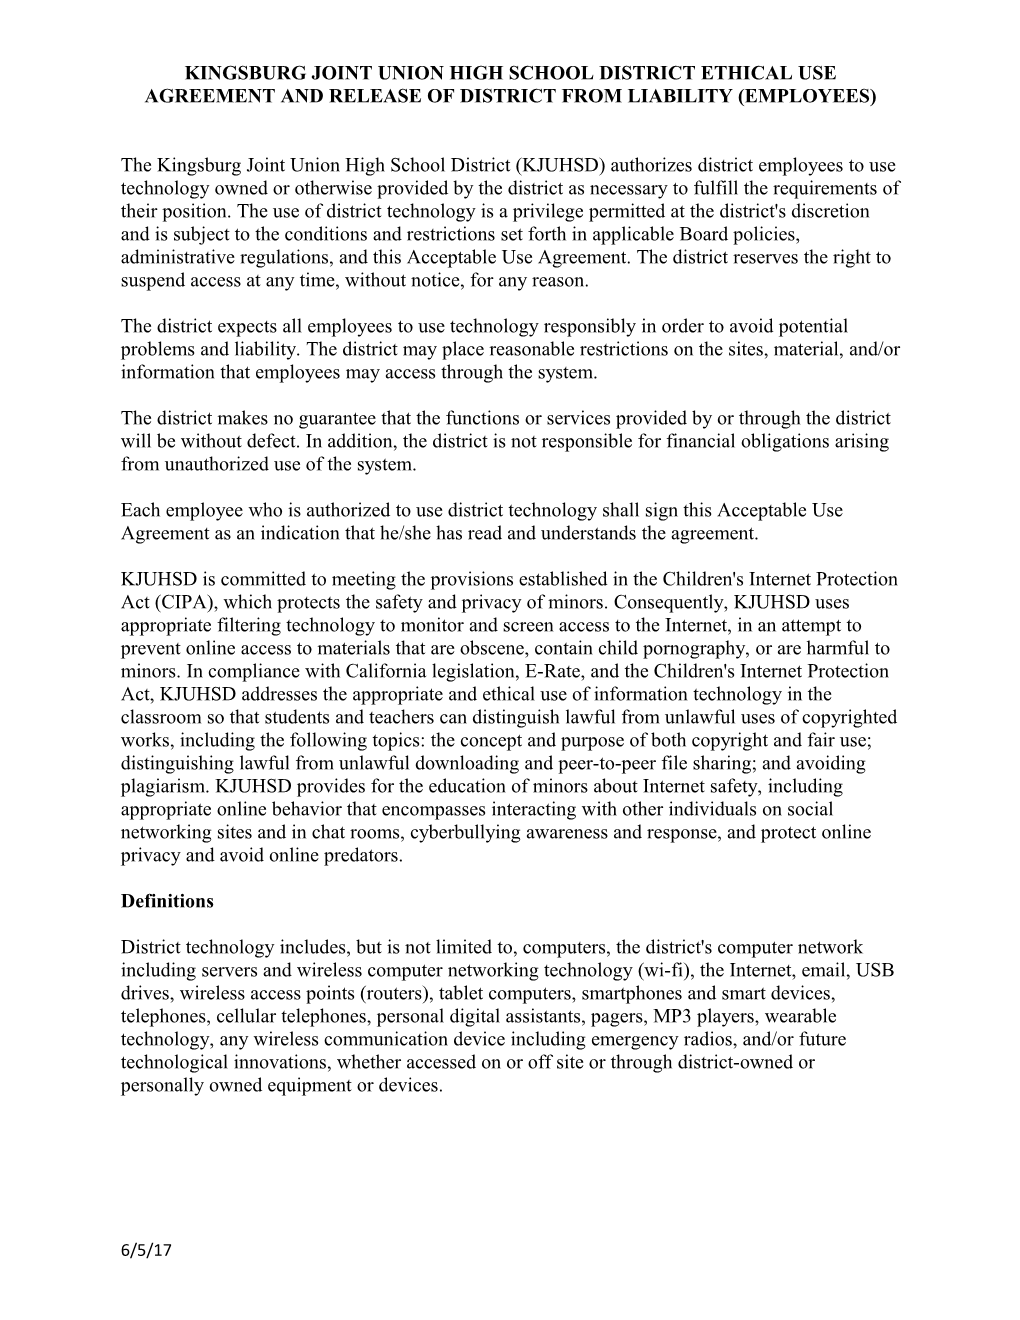 Kingsburg Joint Union High Schooldistrict Ethical Use Agreement and Release of District